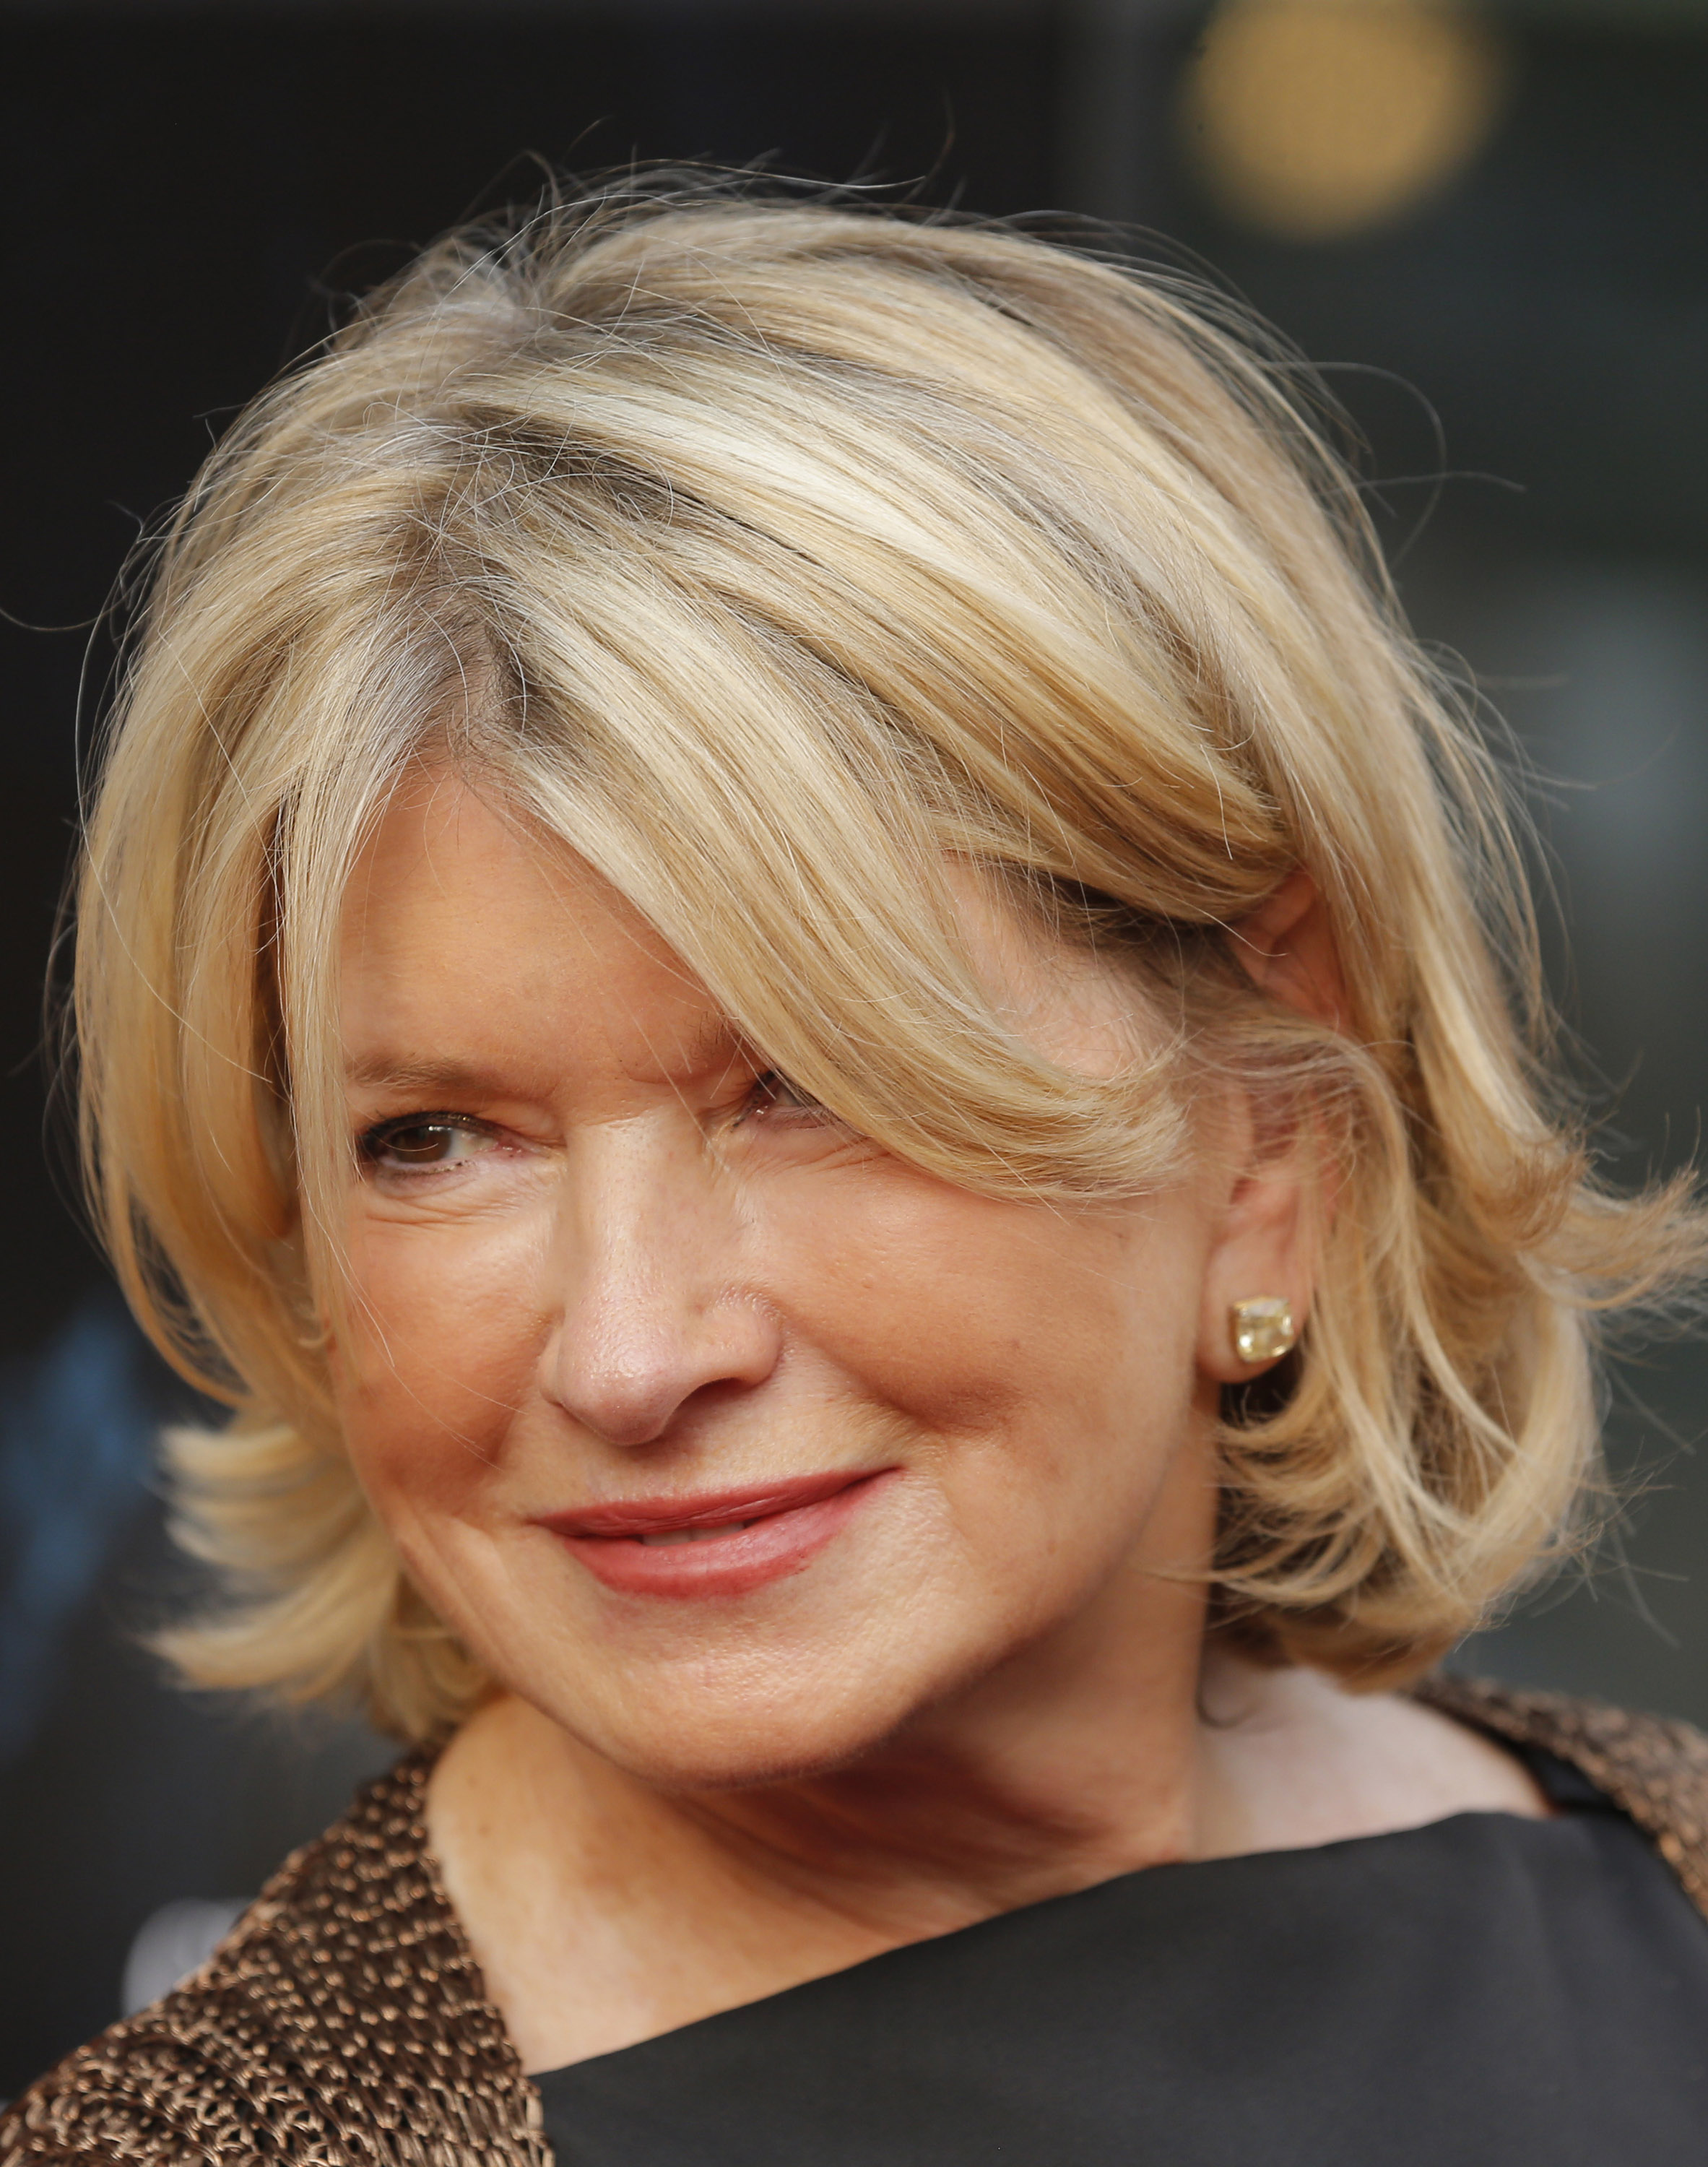 Martha Stewart attends the "Get On Up" premiere at The Apollo Theater on July 21, 2014 in New York City.  